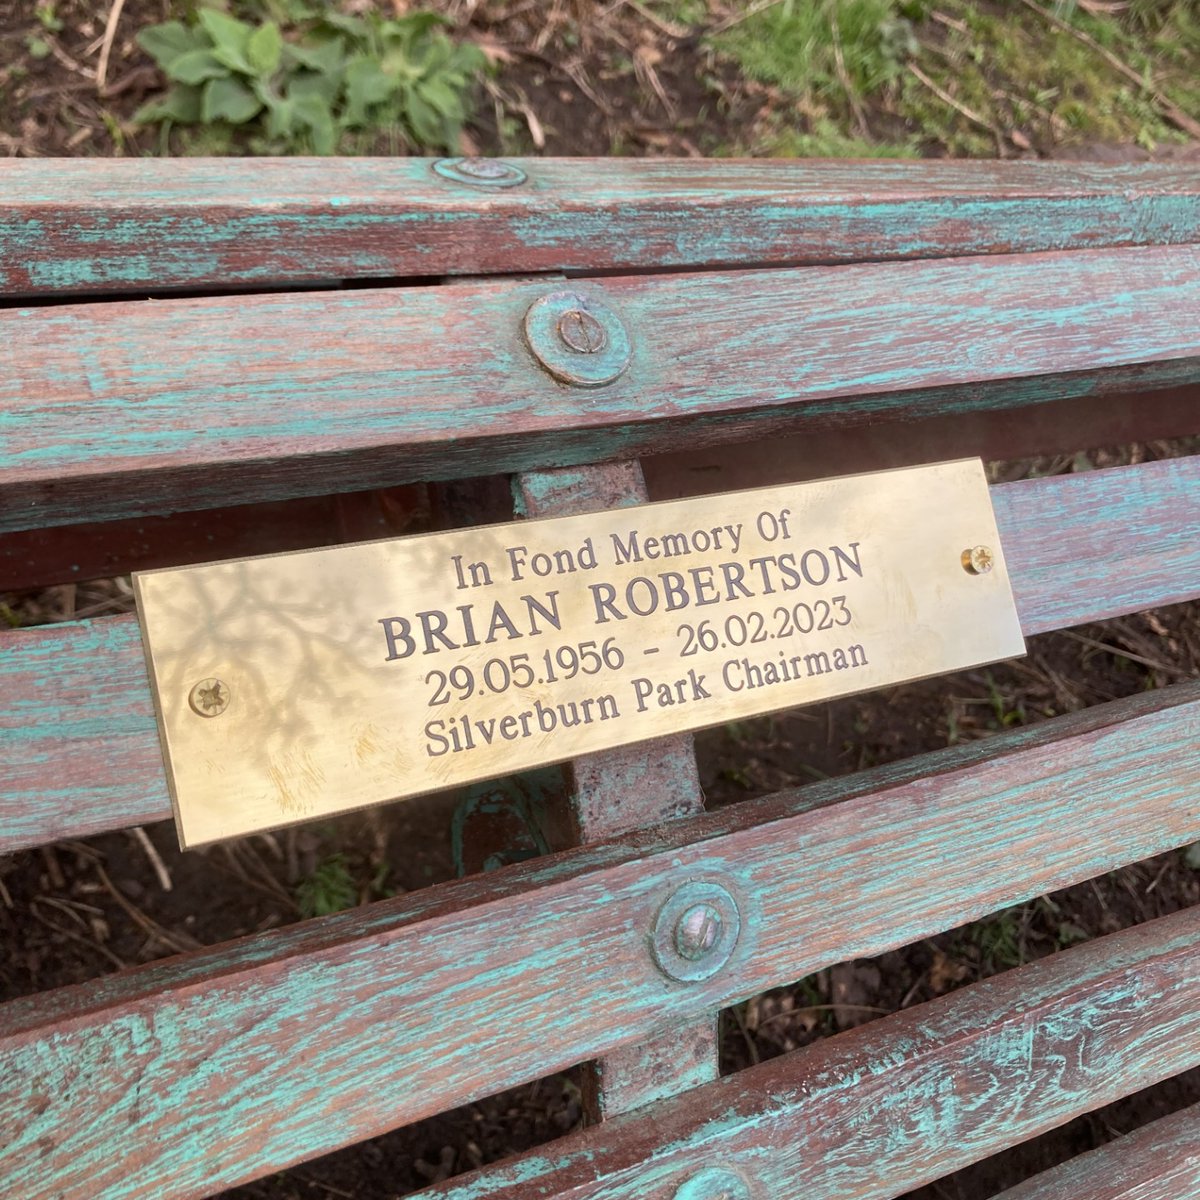 Today marks one year since the sudden passing of former Silverburn chairman Brian Robertson. Brian was instrumental in ensuring the future of the park, planning & fundraising for the flax mill project. This unique vintage bench in his memory now has pride of place in the gardens